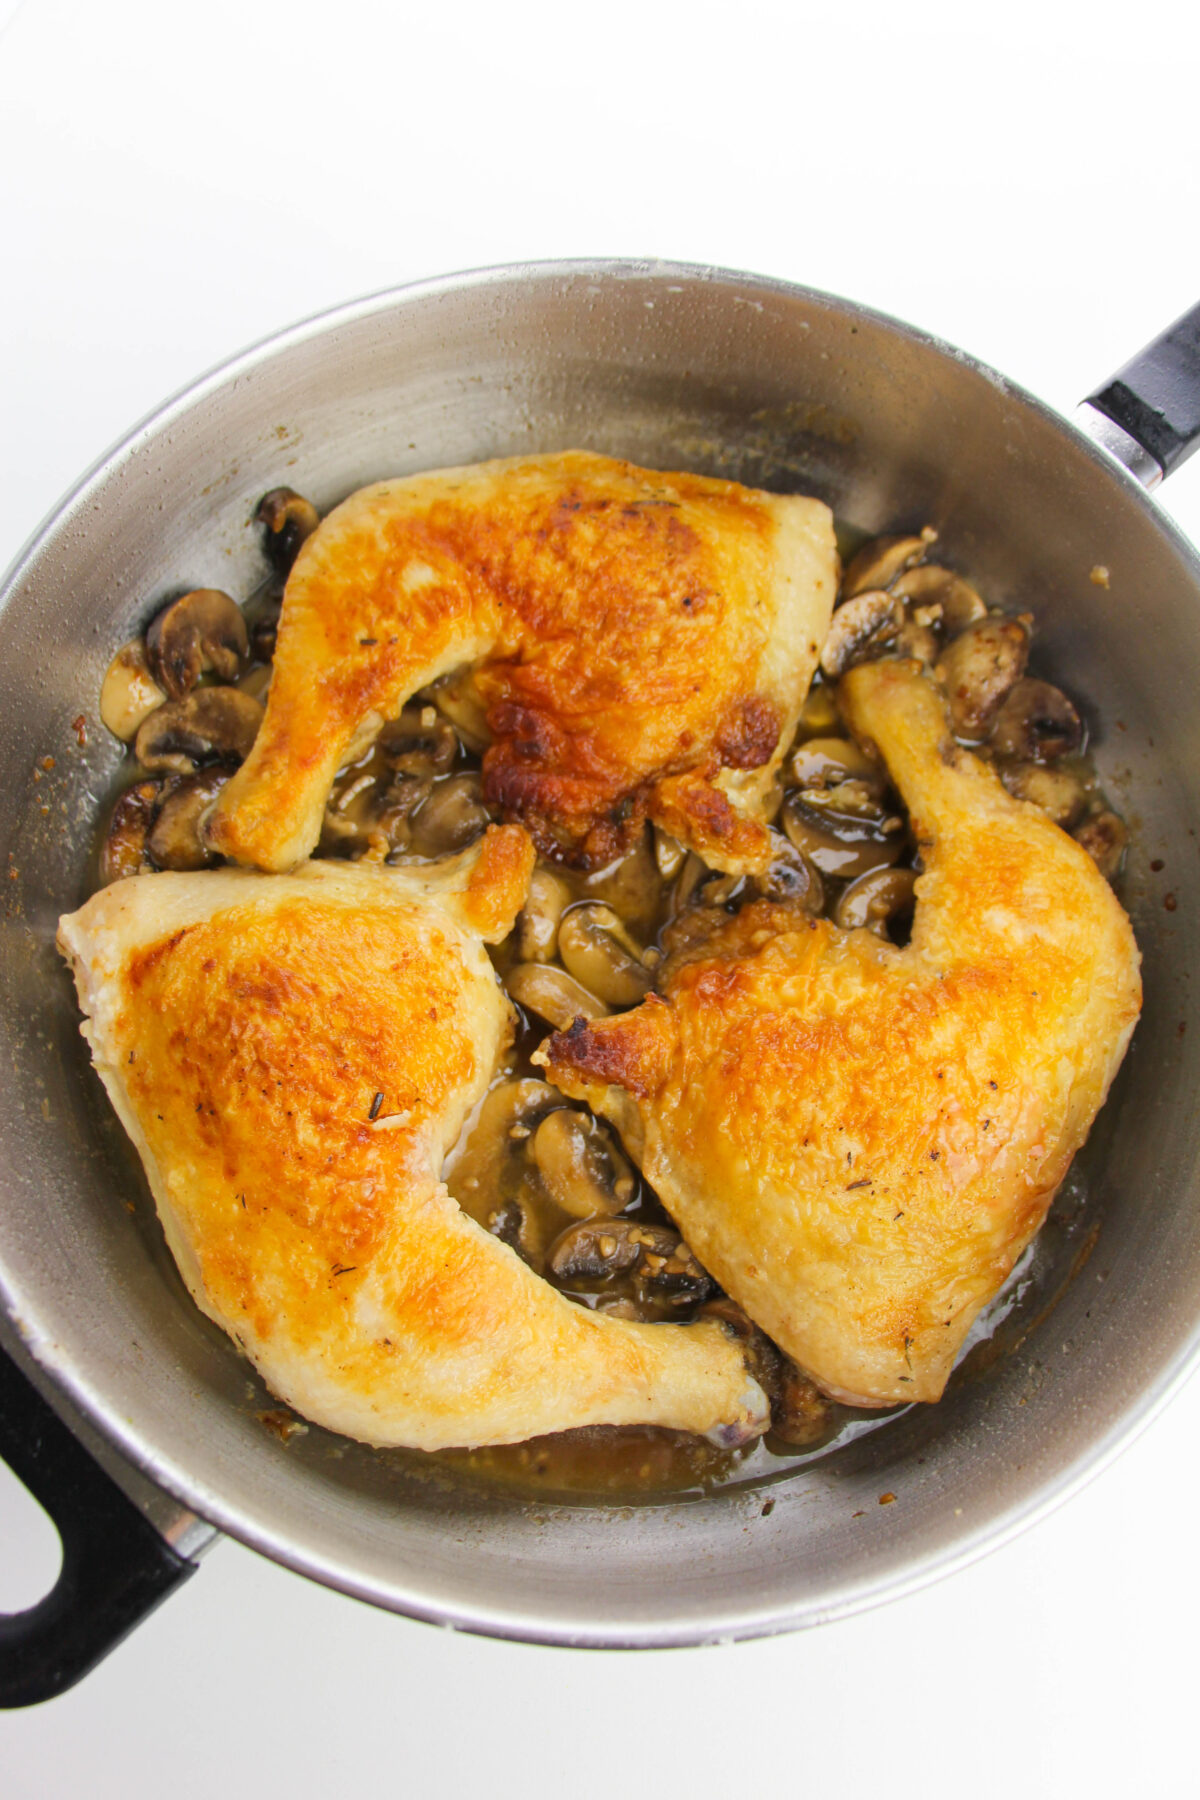 Chickens back in the skillet with the mushrooms.